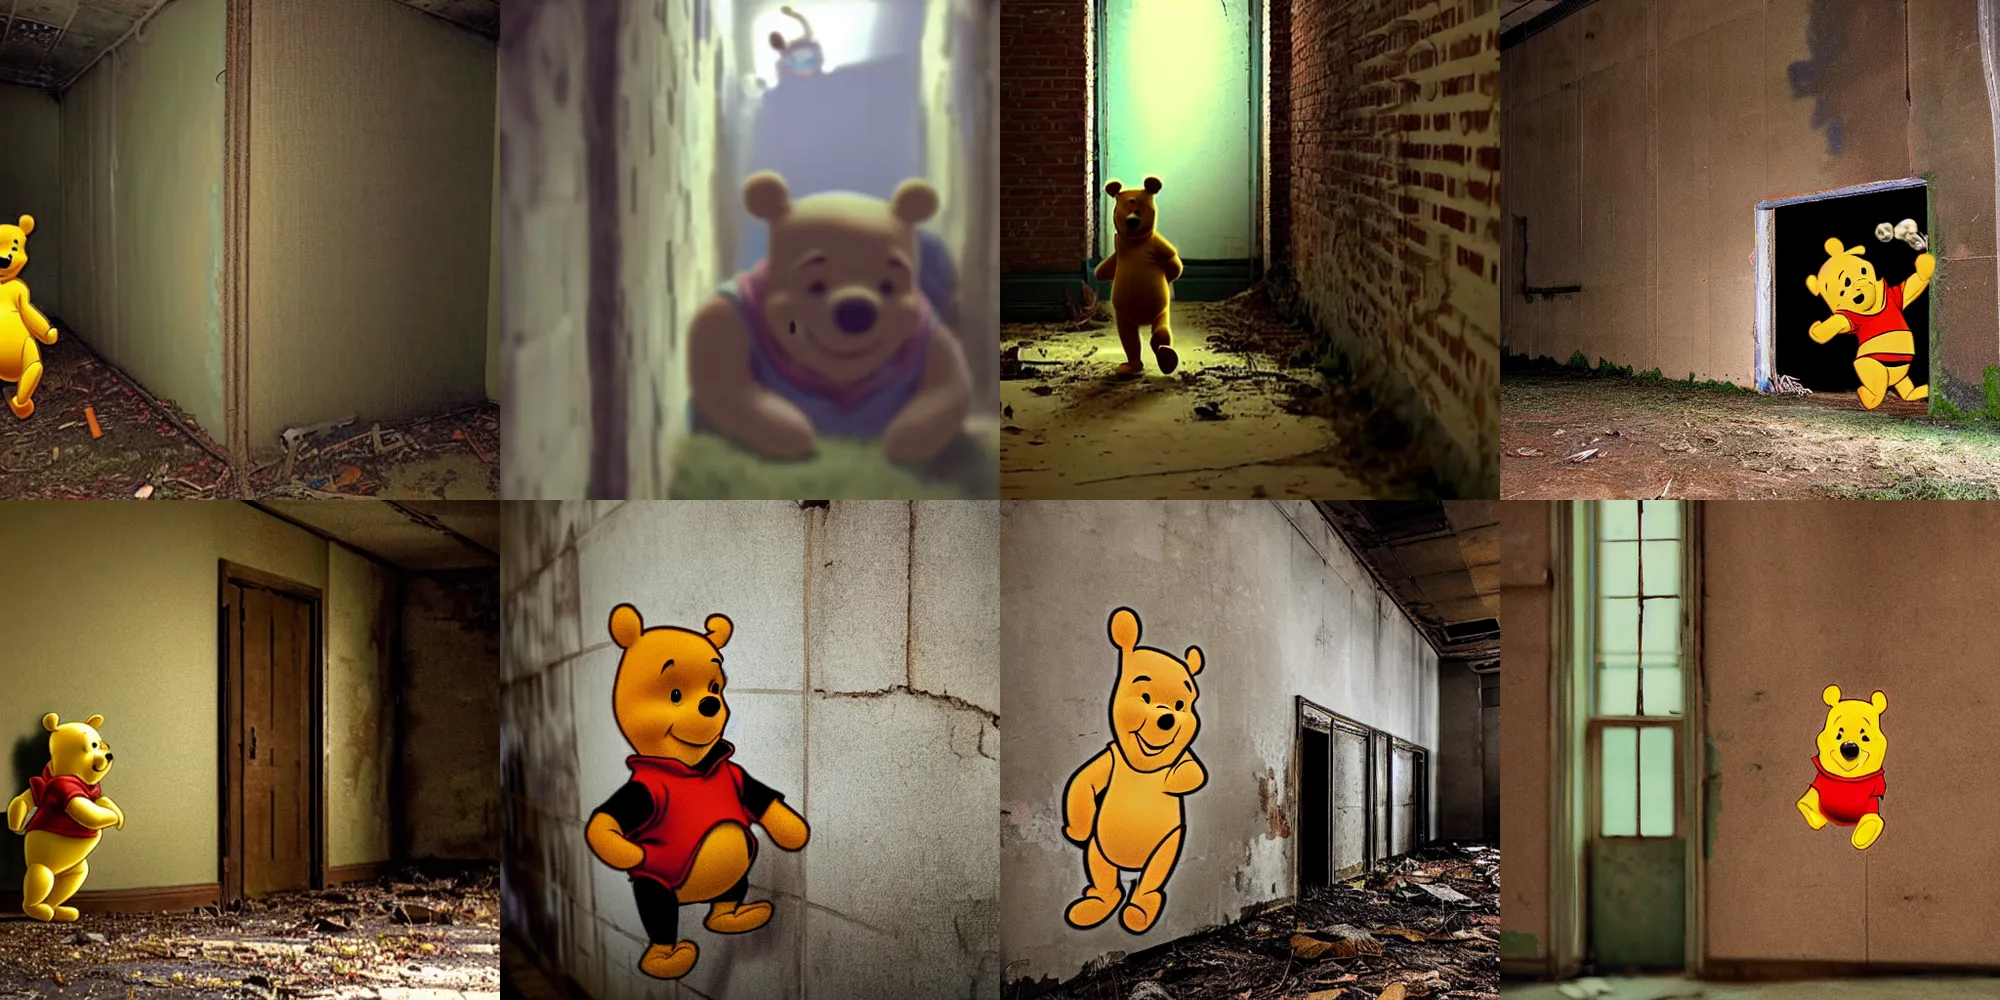 Prompt: a blurry cryptid sighting of winnie the pooh hiding behind the wall in an abandoned building, found footage, disturbing